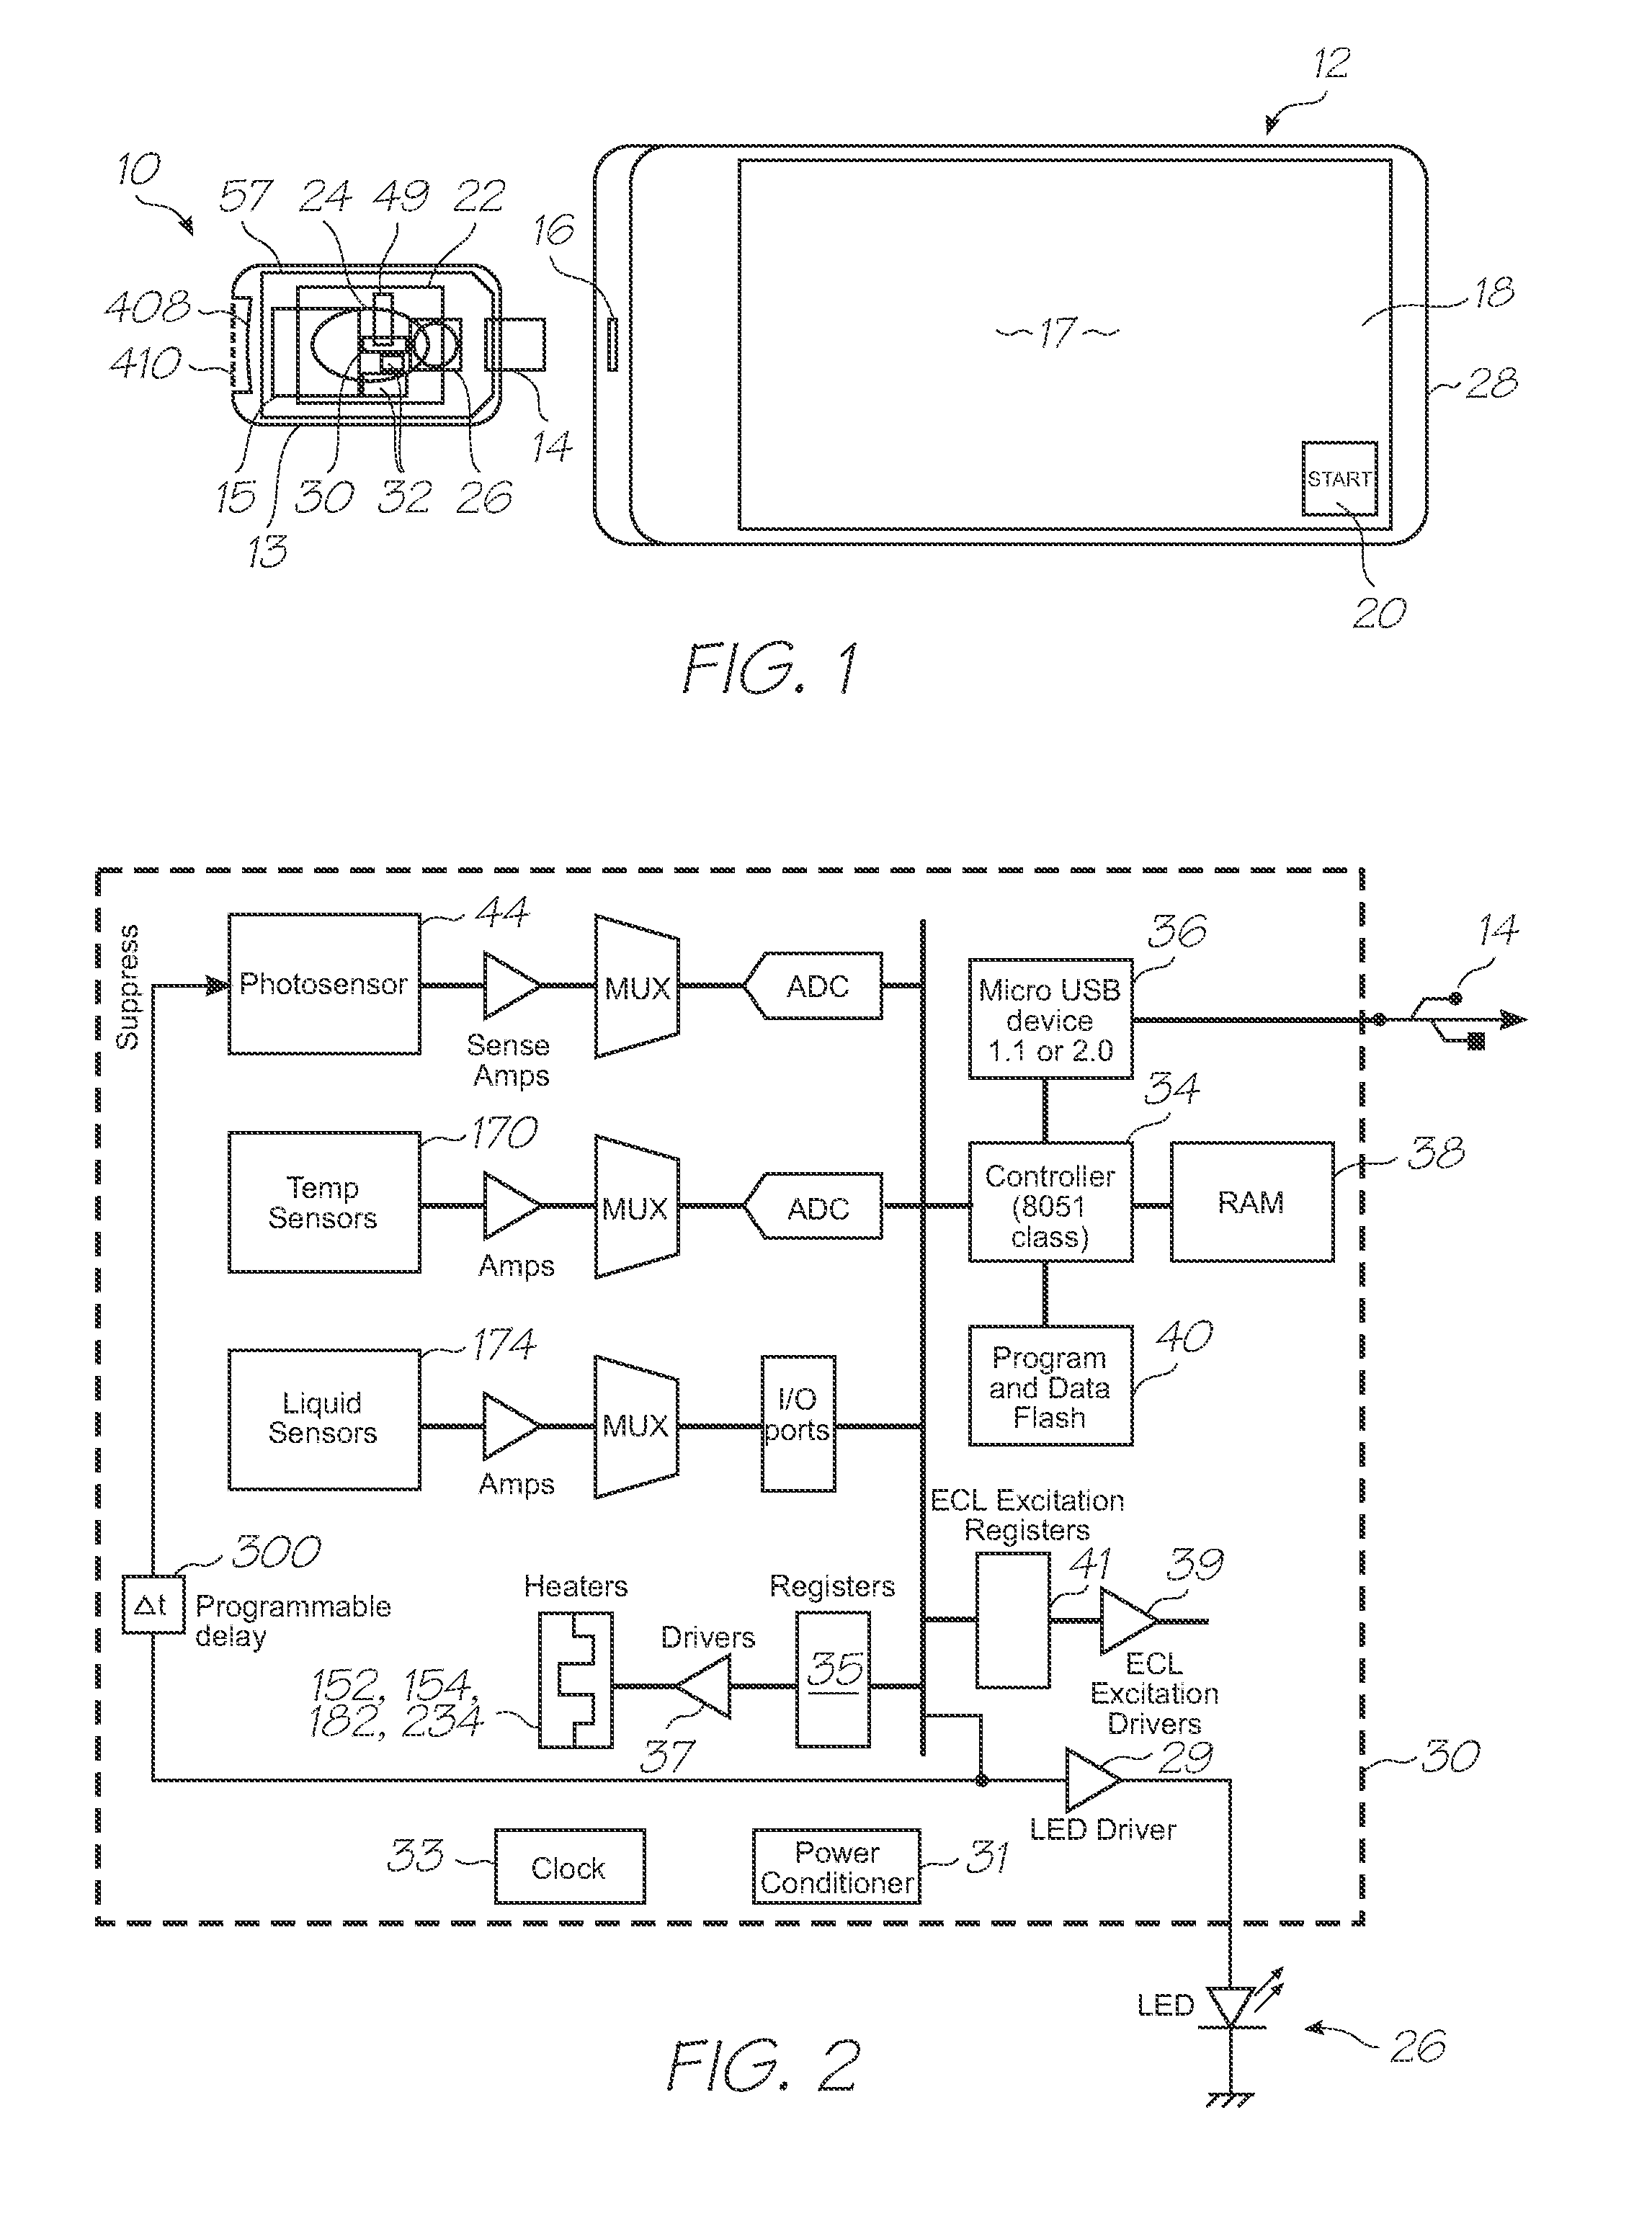 Microfluidic device with low reagent volumes